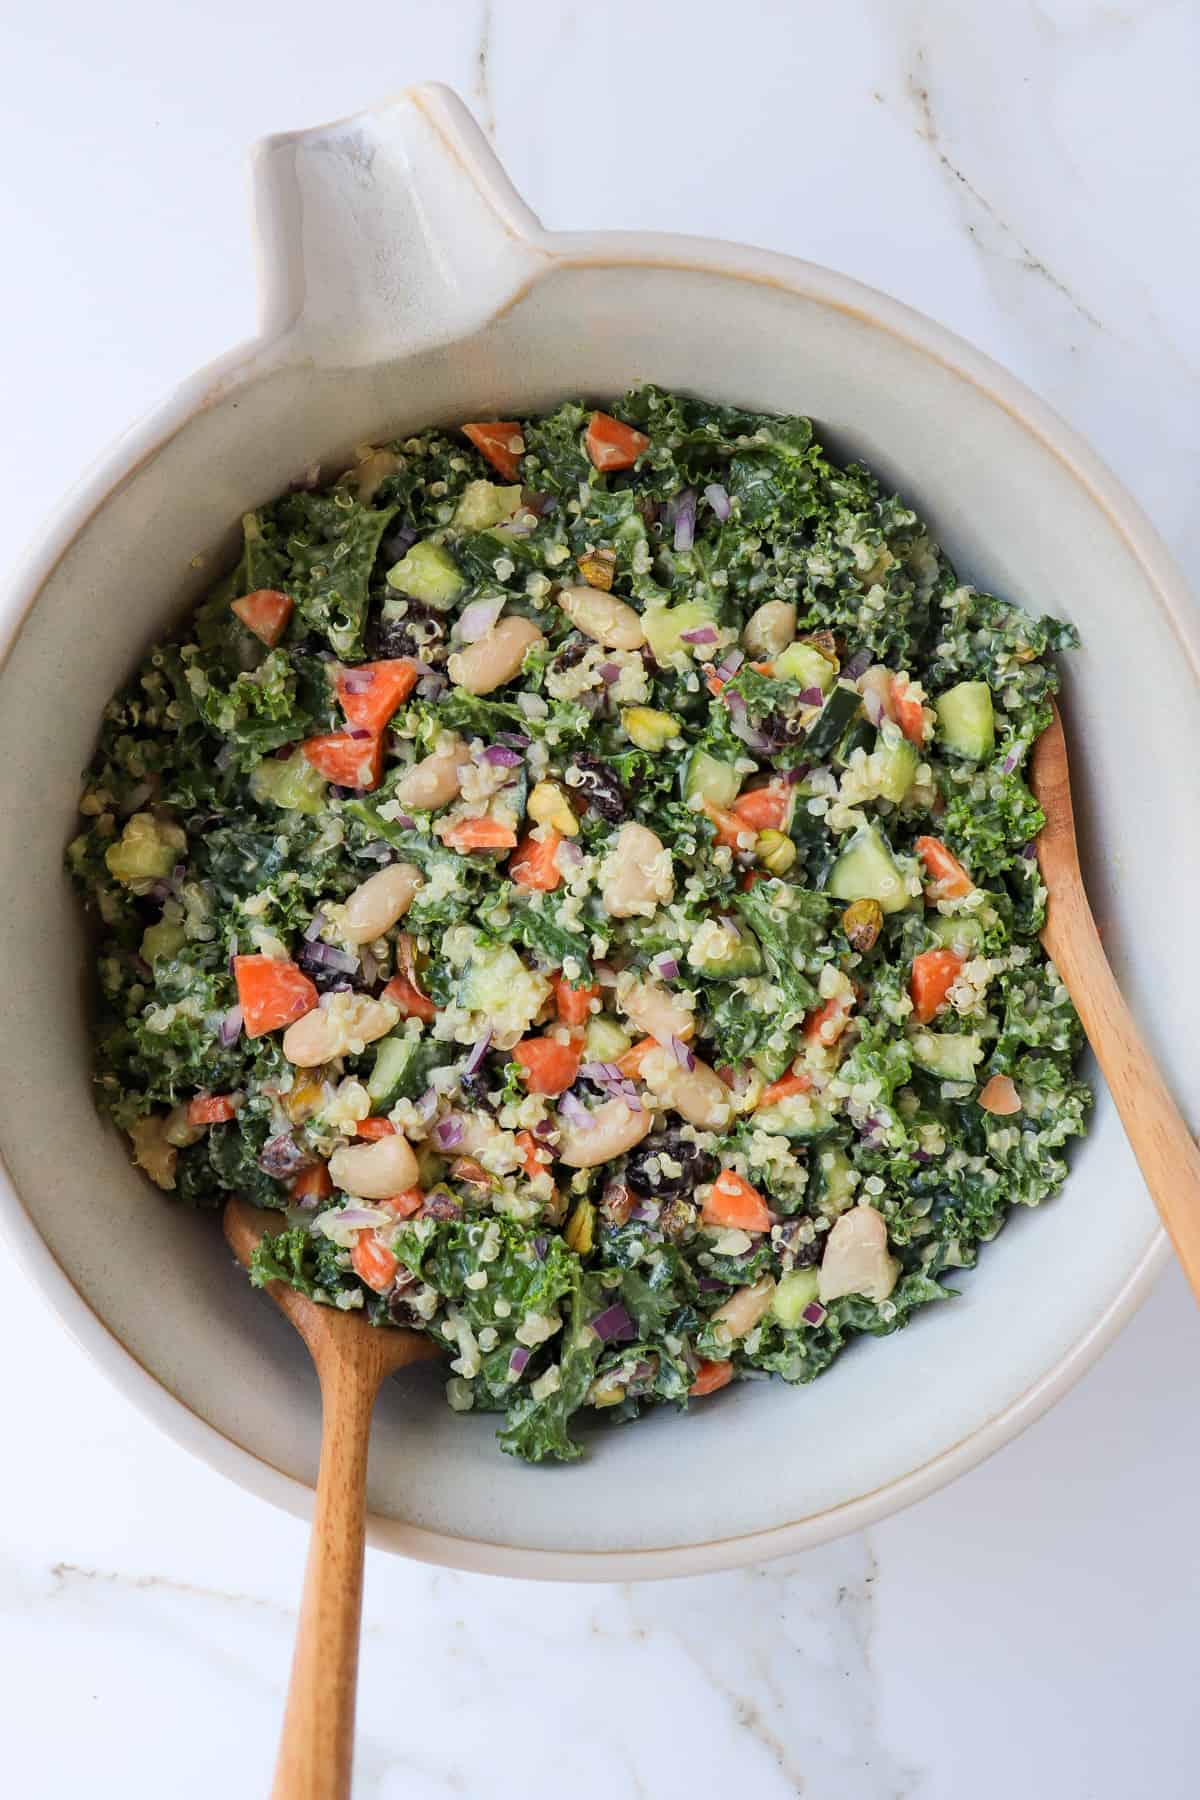 Kale salad in a bowl with mixing spoons.